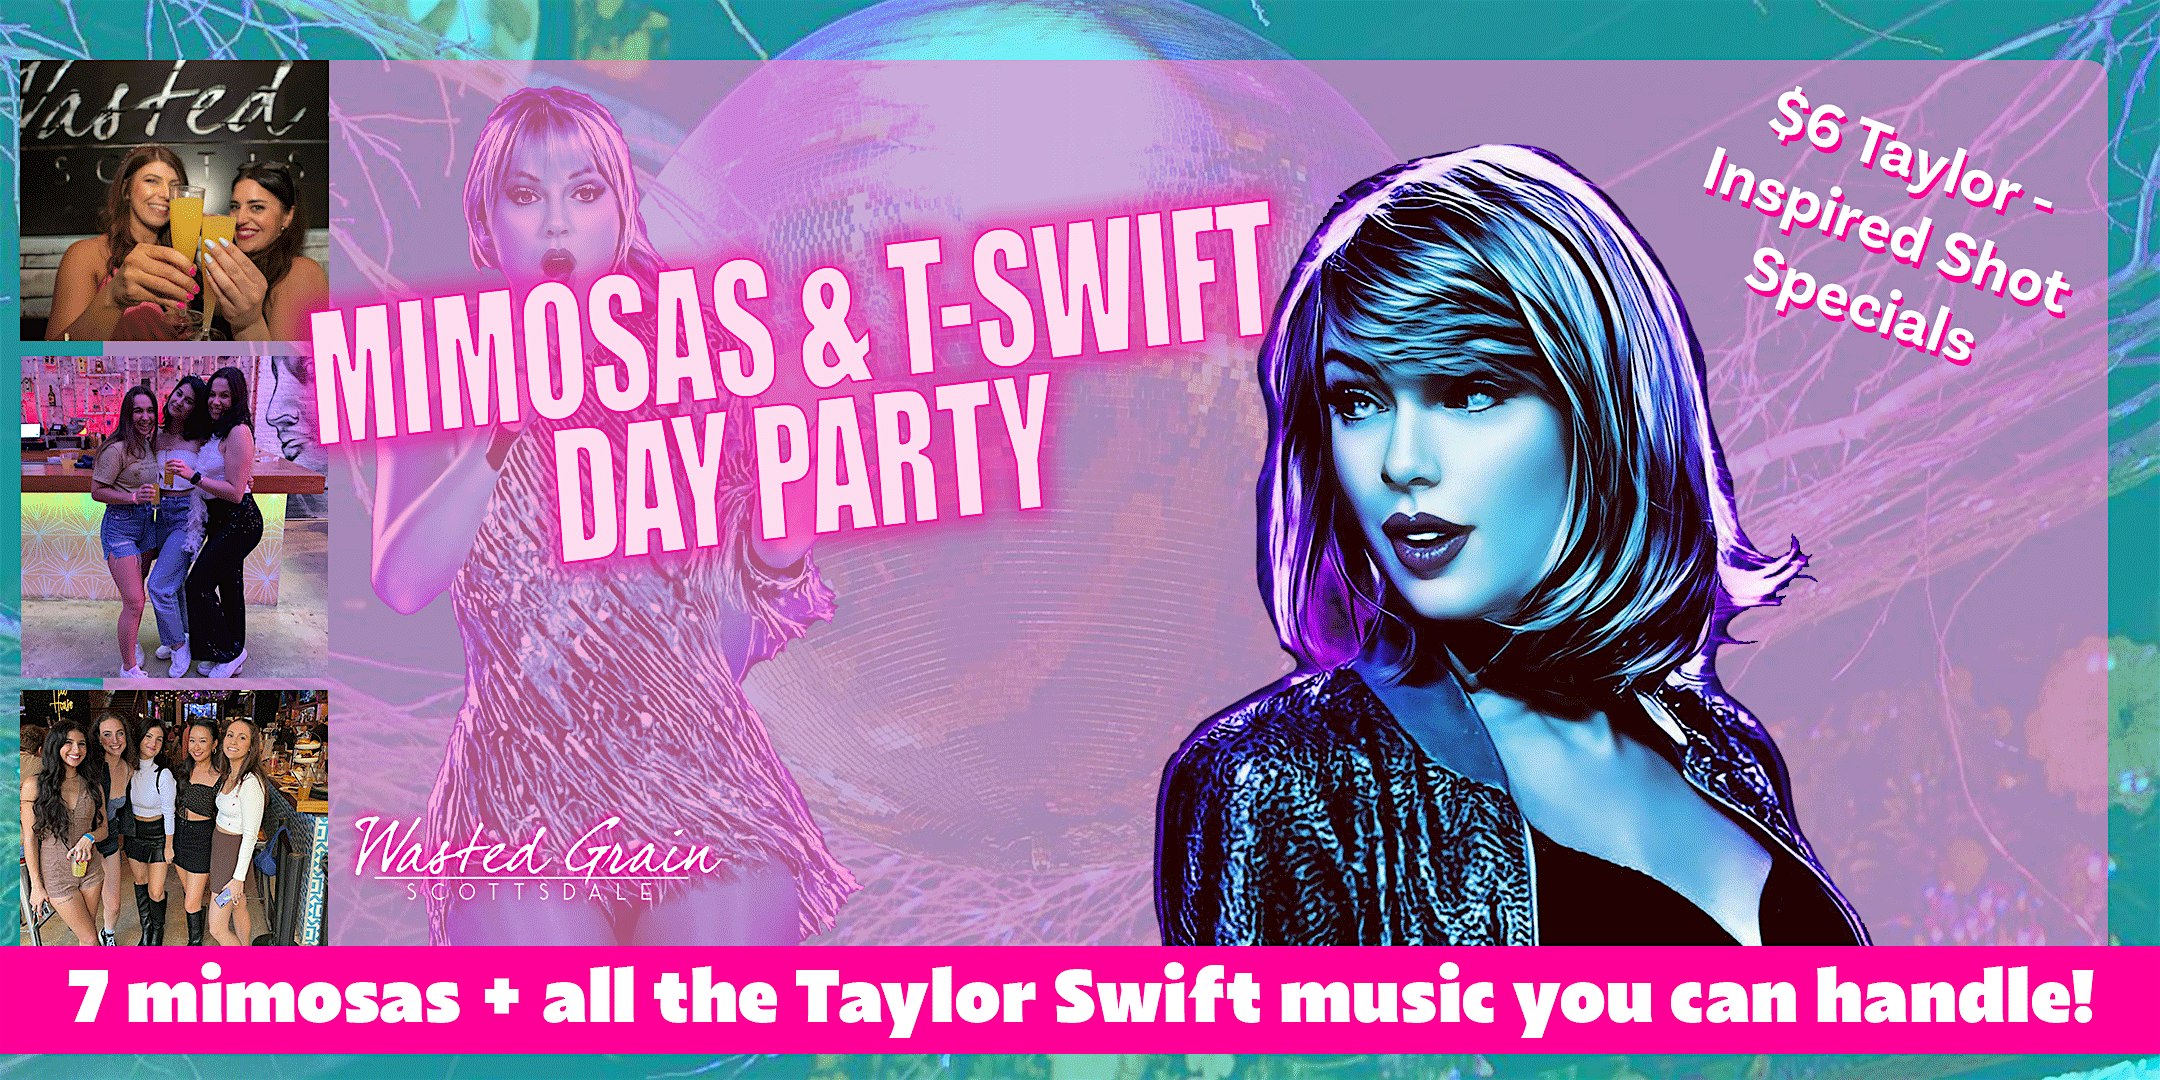 Mimosas & T-Swift Day Party at Wasted Grain - Includes 7 Mimosas